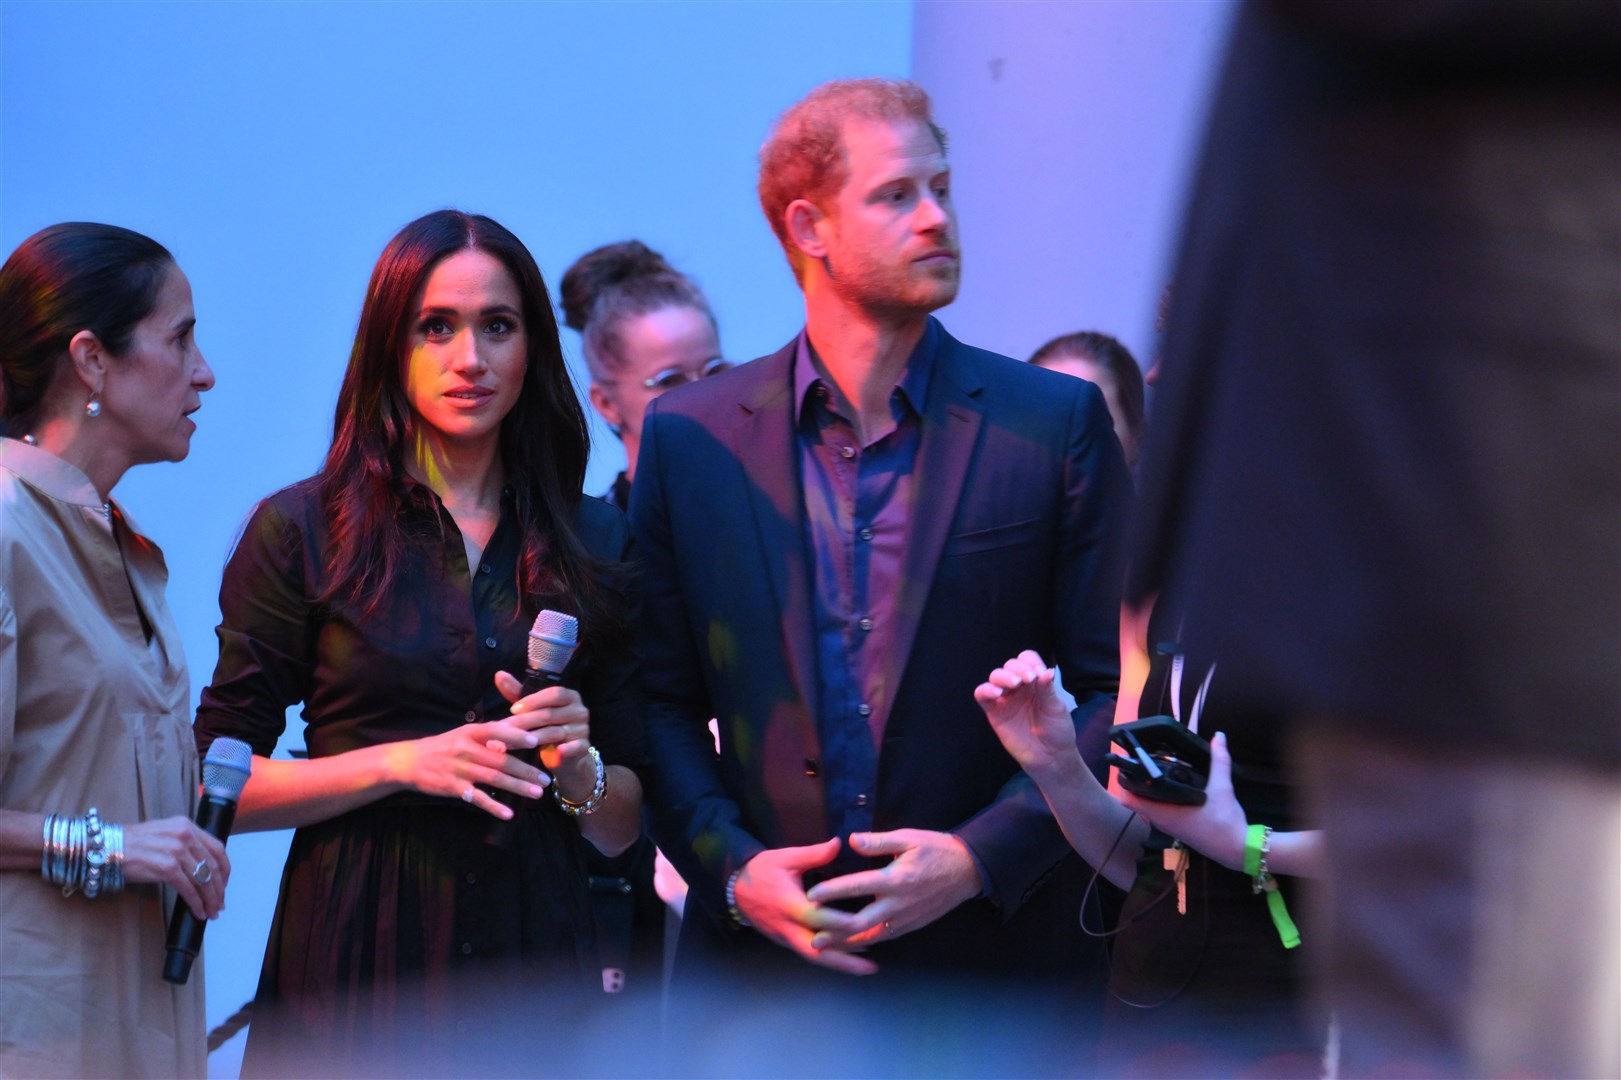 Harry and Meghan at the Invictus Games in Dusseldorf (Bruce Adams/Daily Mail/PA)